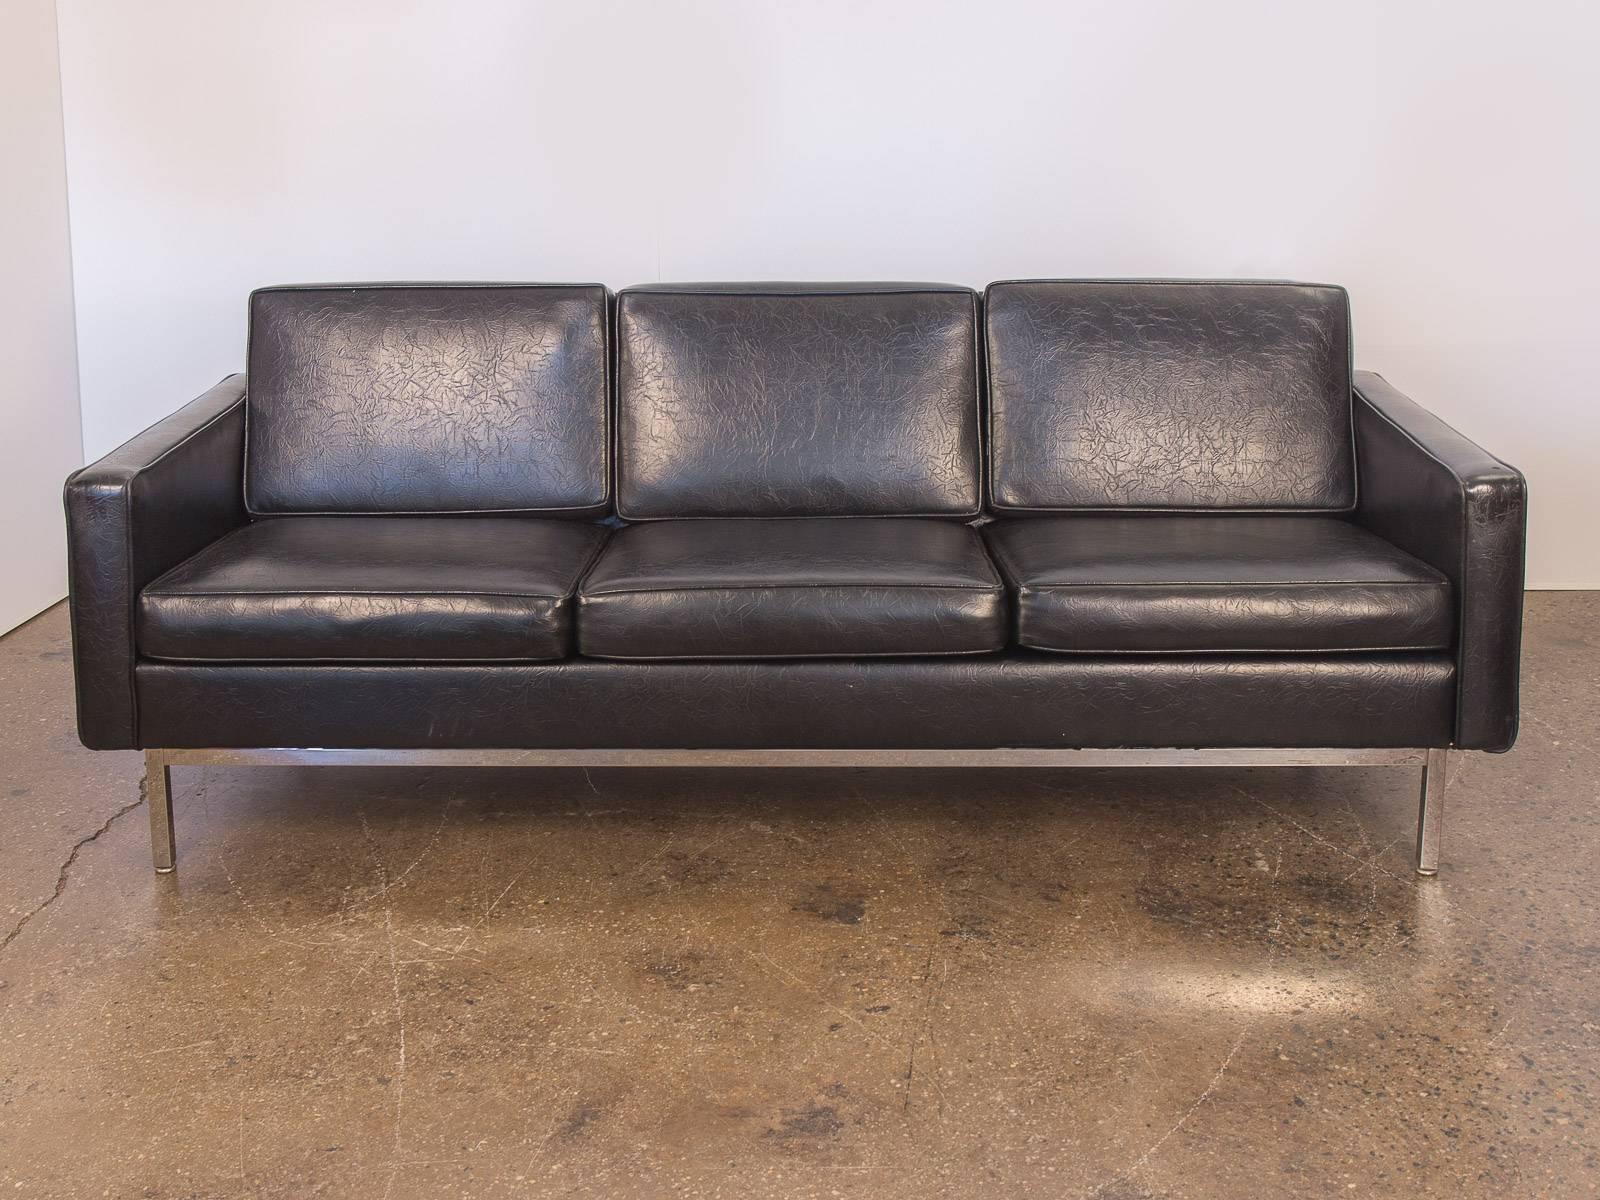 1990s, black chrome frame sofa for Steelcase. A model relative of the Classic Florence Knoll sofa. This three-seat boasts simple geometry with clean lines. Black textured vinyl is staunch and pliable with one blemish on the left armrest. All other